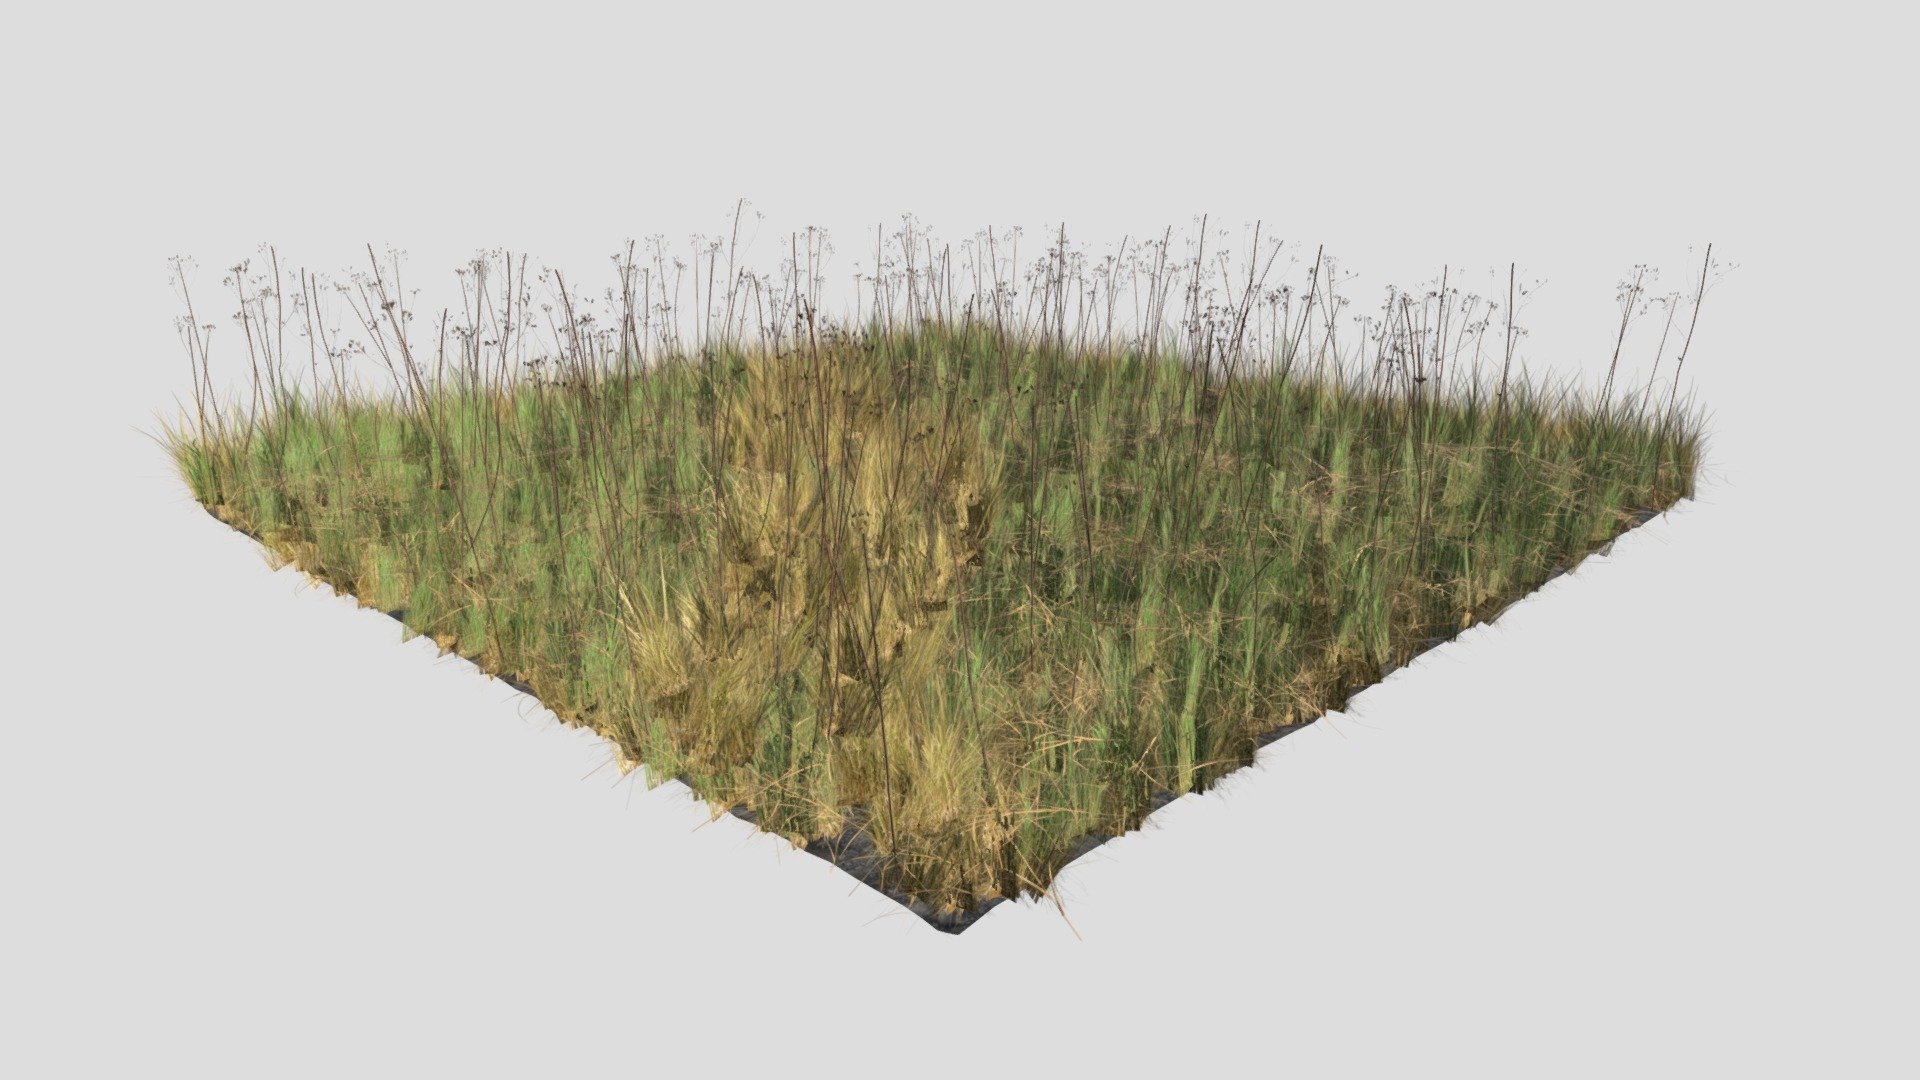 Hi all,

This is PBR Dry St John's Wort meadow patch created in Blender in real world scale (100cm x 100cm). It includes 5 different models:

soil (3D scanned)

dry st John's wort

dry grass

dead grass

grass

It comes in following formats:

.blend

.fbx

.obj

.dae

The blender file has the shaders set up, so it's ready to render using Cycles. The title image is not included.

Each model comes with set of 4K .png maps:

base color

roughness

normal

opacity

translucency

ambient occlusion

The product comes with a free gift! - Meadow Patch Dry St Johns Wort - Buy Royalty Free 3D model by kambur 3d model